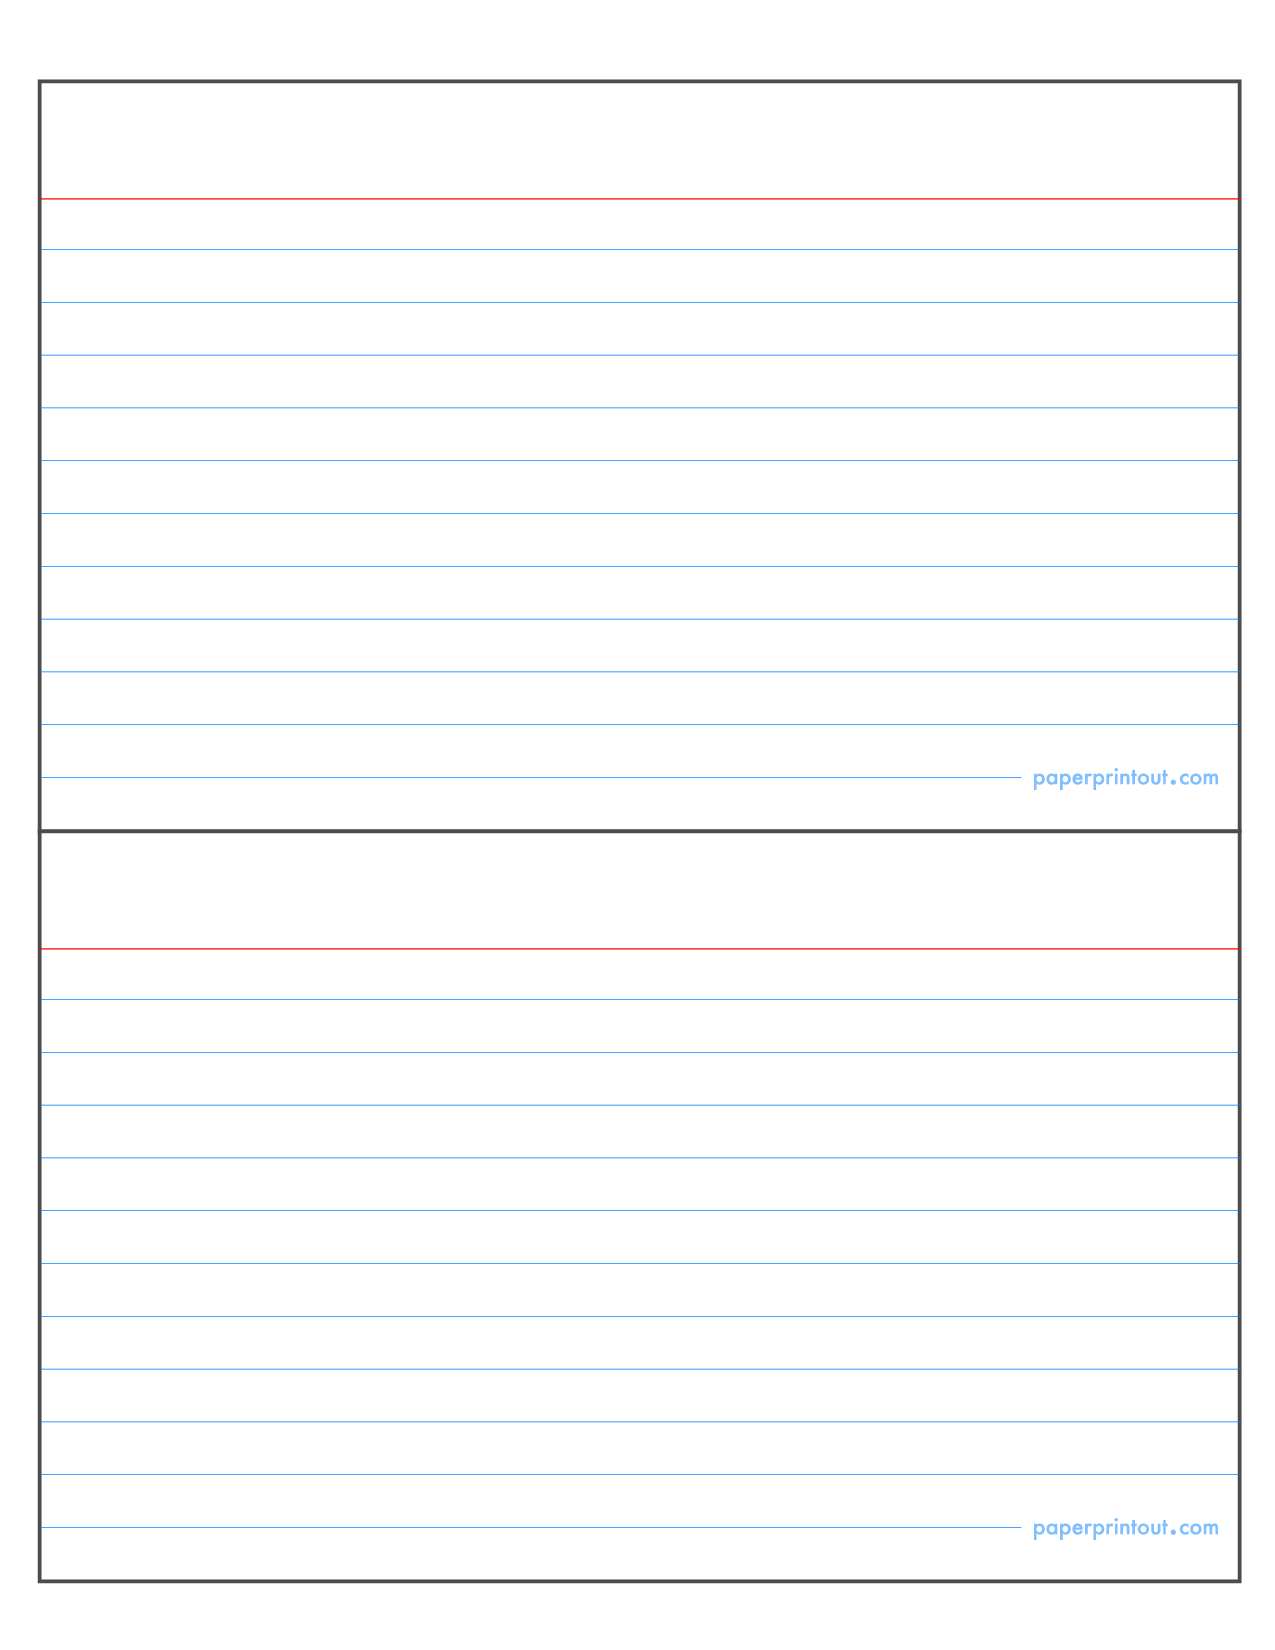 9-best-images-of-printable-index-cards-with-lines-printable-index